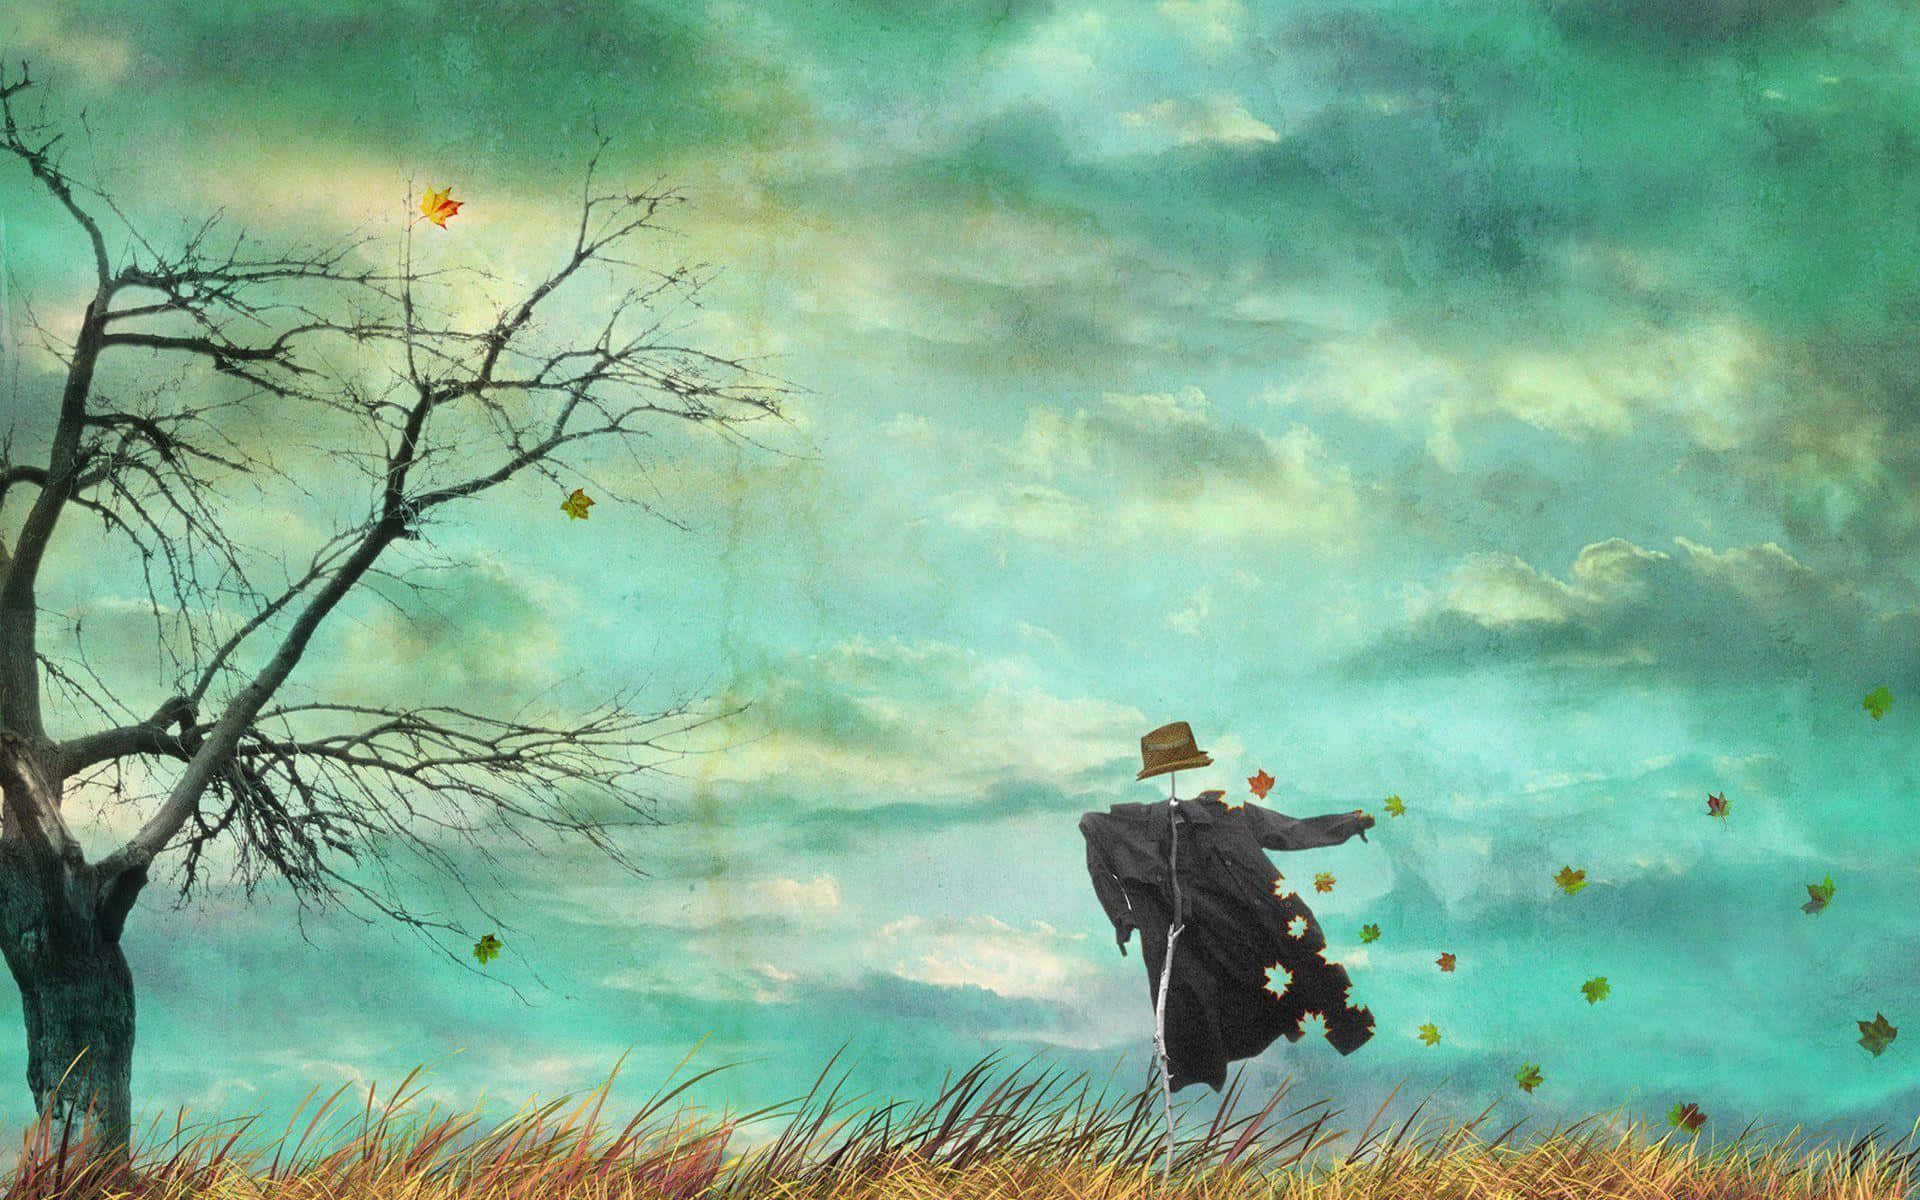 Scarecrow in golden wheat field creates an autumn ambiance Wallpaper